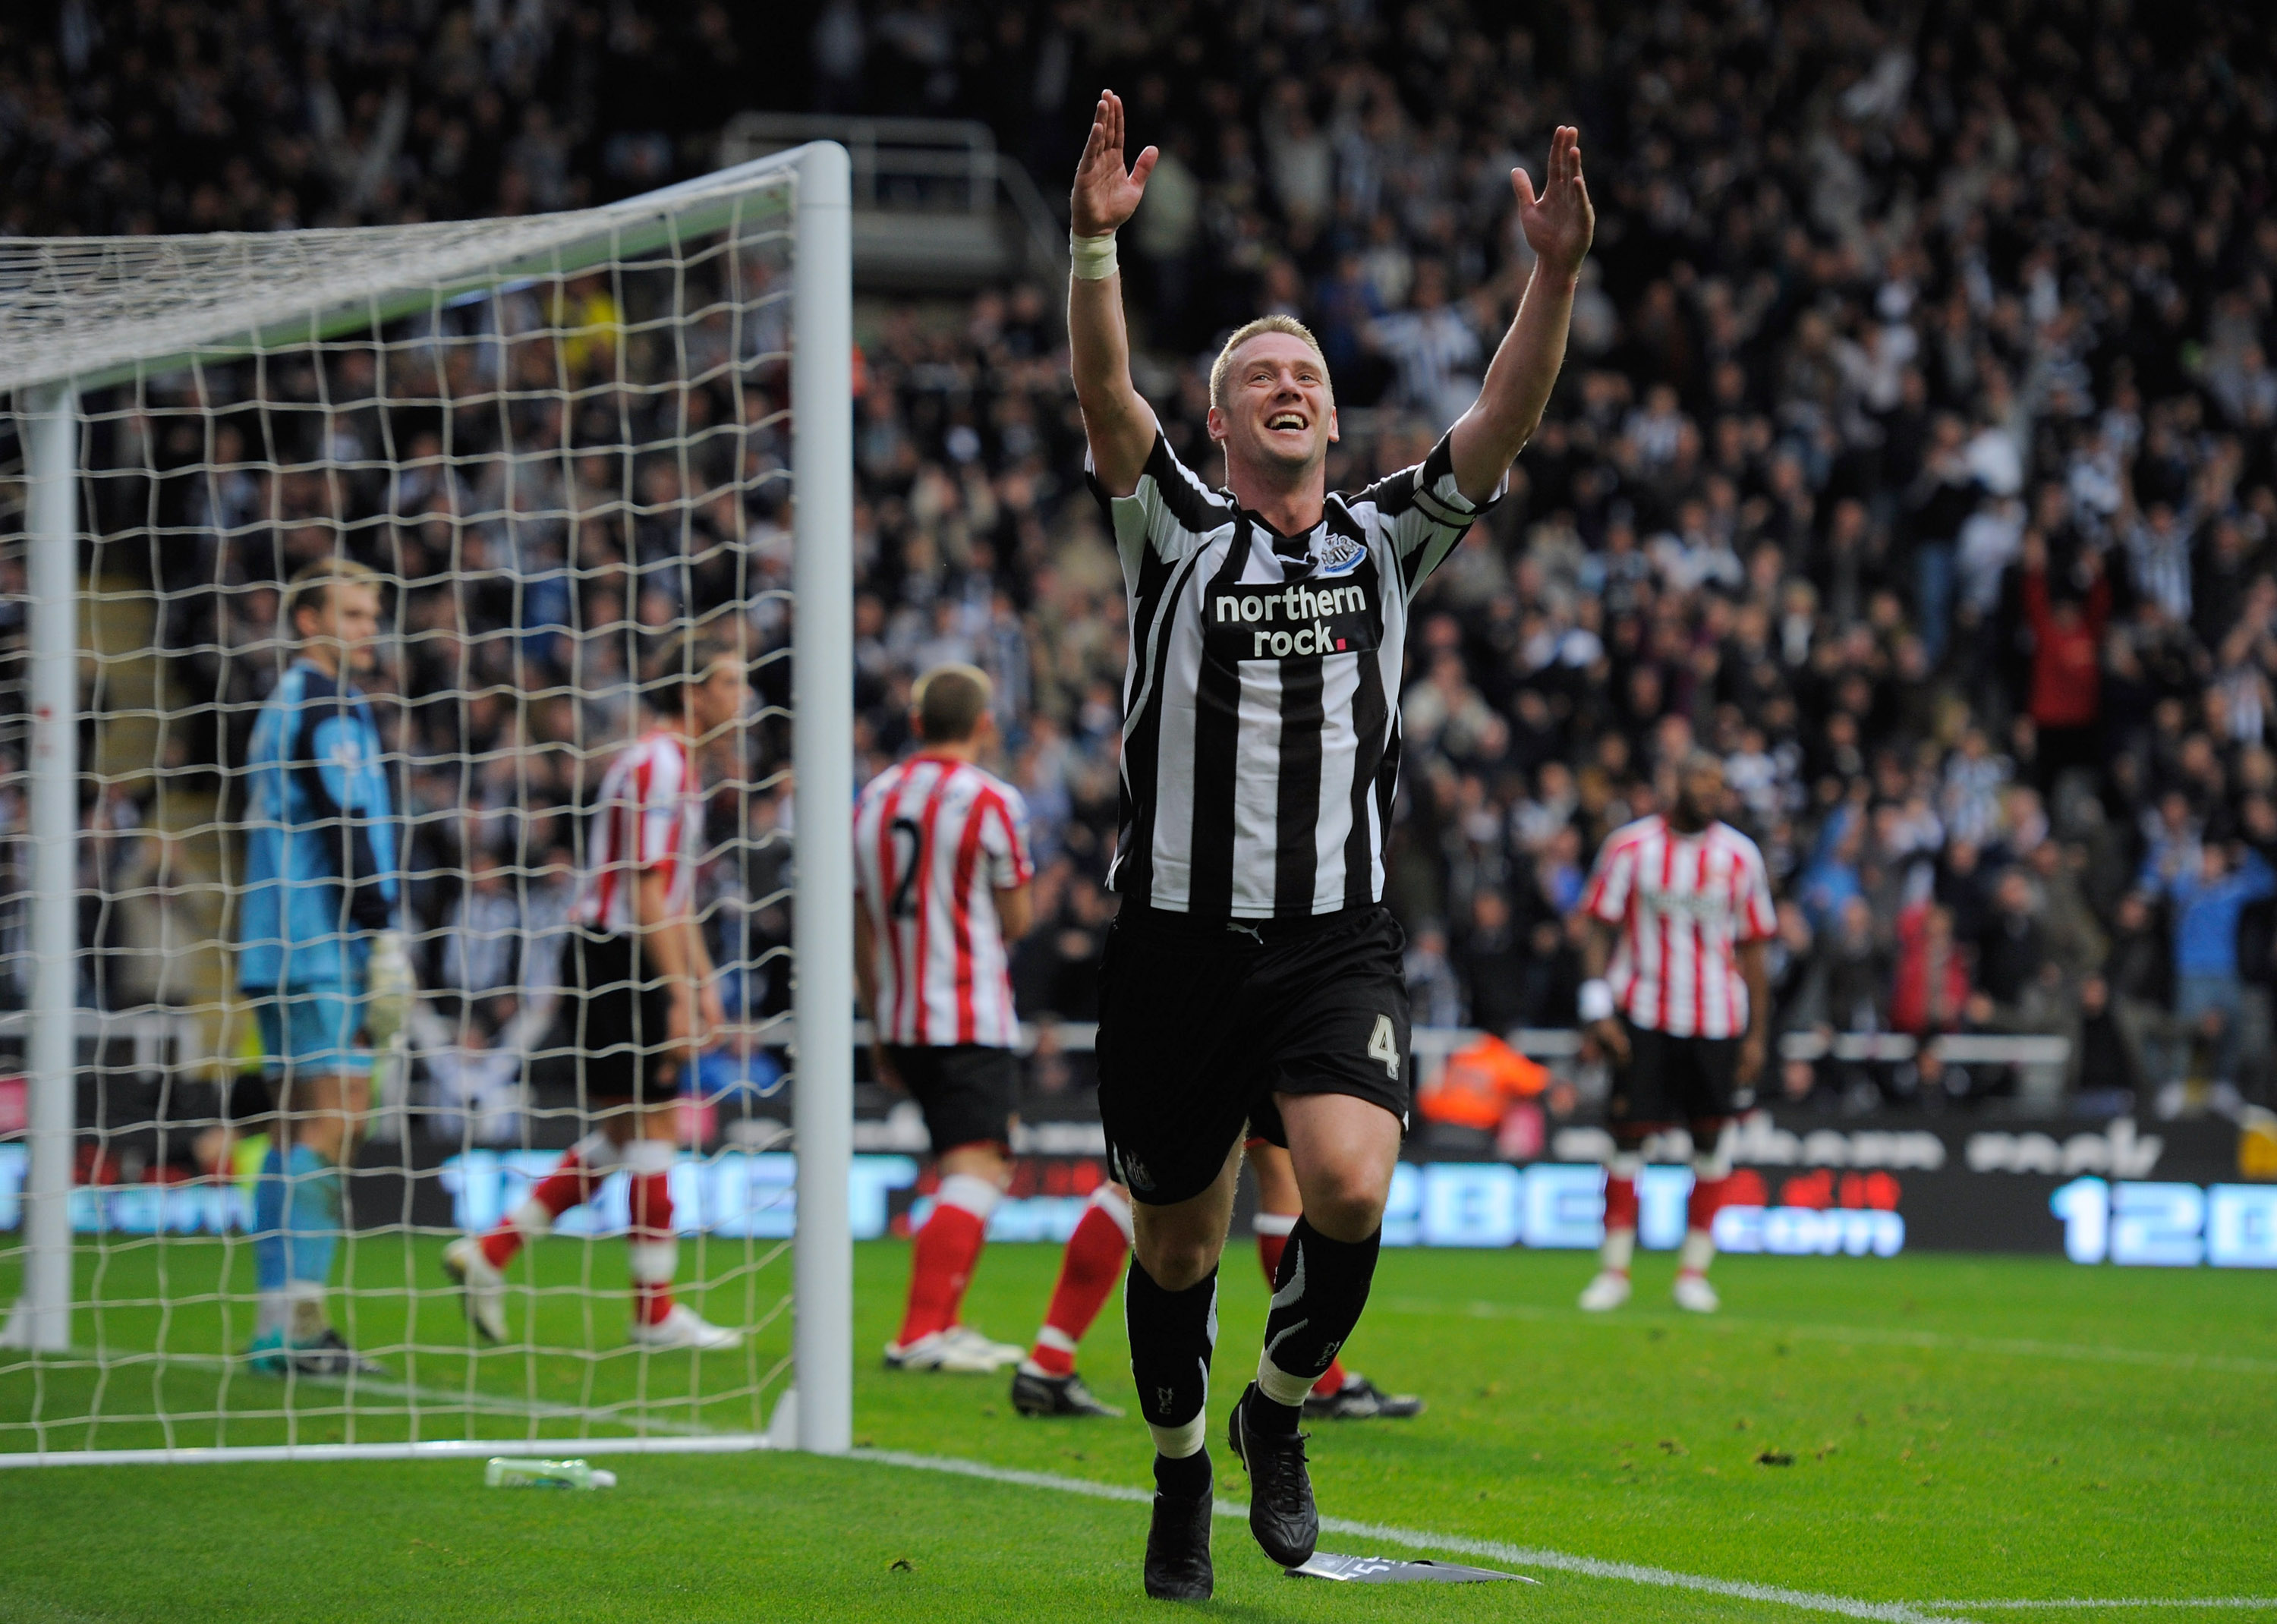 NEWCASTLE UPON TYNE, ENGLAND - OCTOBER 31:  Kevin Nolan of Newcastle celebrates after scoring a goal to make it 5-0 during the Barclays Premier League match between Newcastle United and Sunderland at St James' Park on October 31, 2010 in Newcastle upon Ty